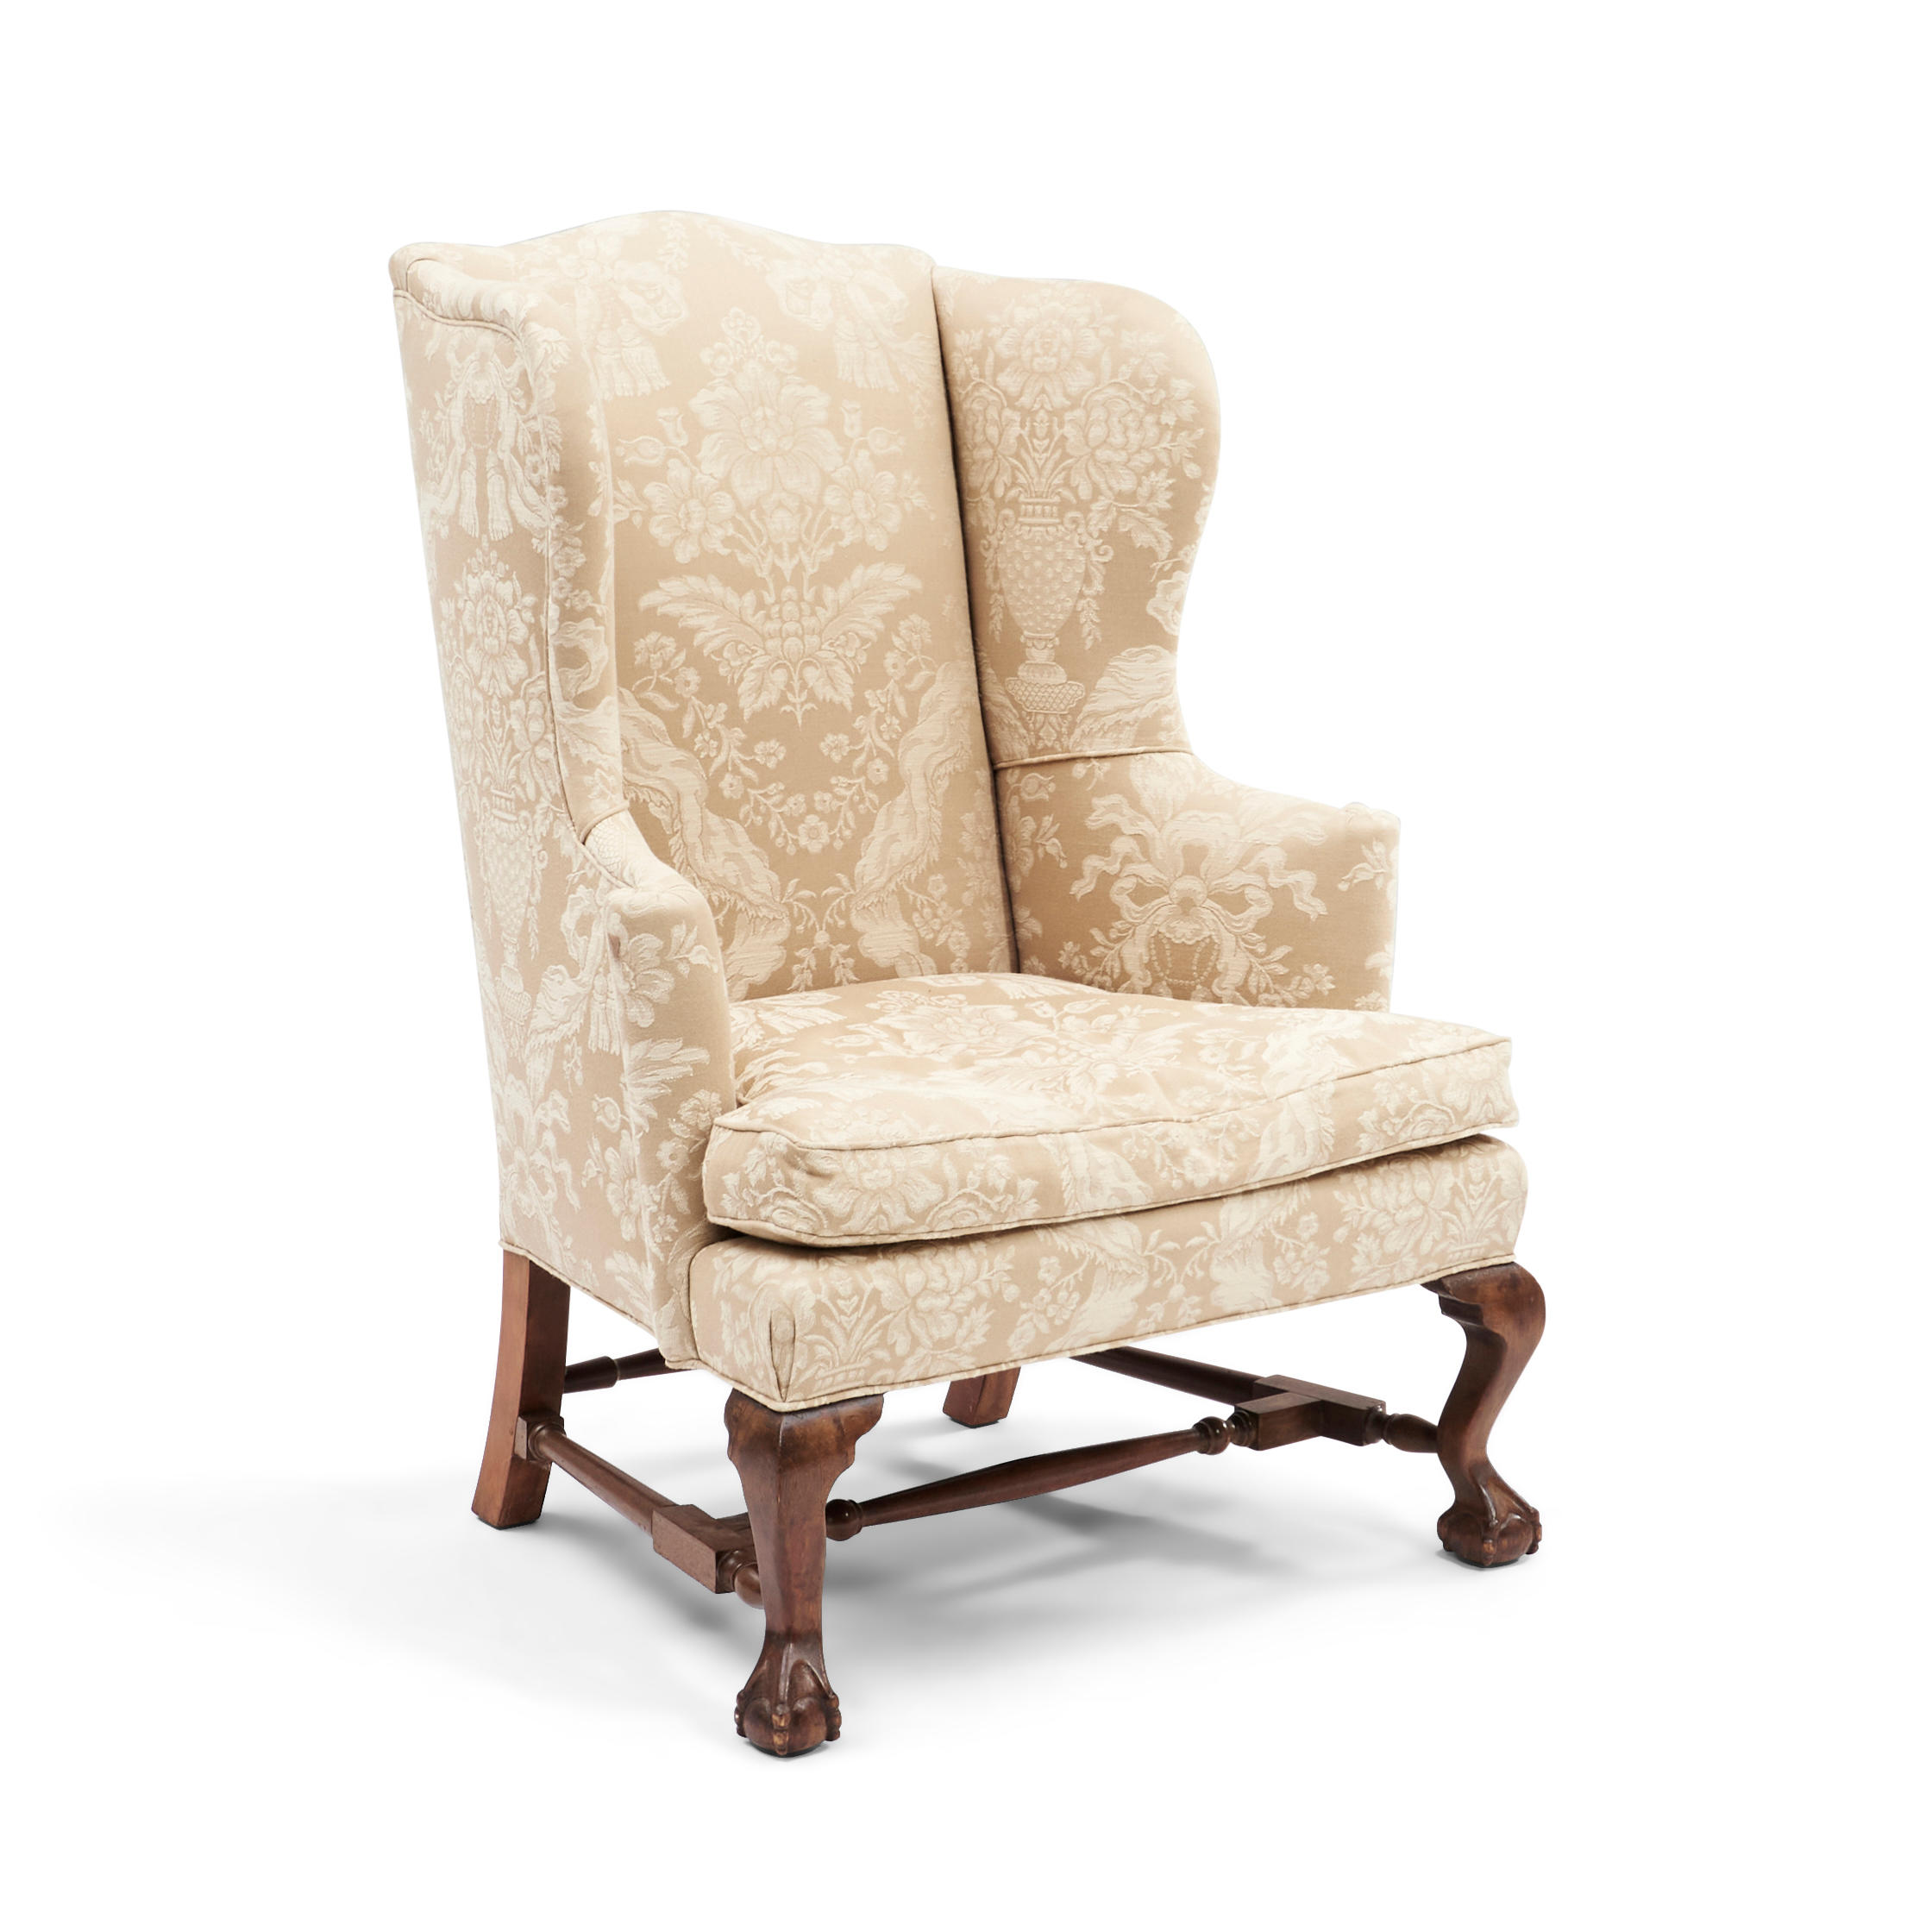 CHIPPENDALE STYLE MAHOGANY UPHOLSTERED 3ae876